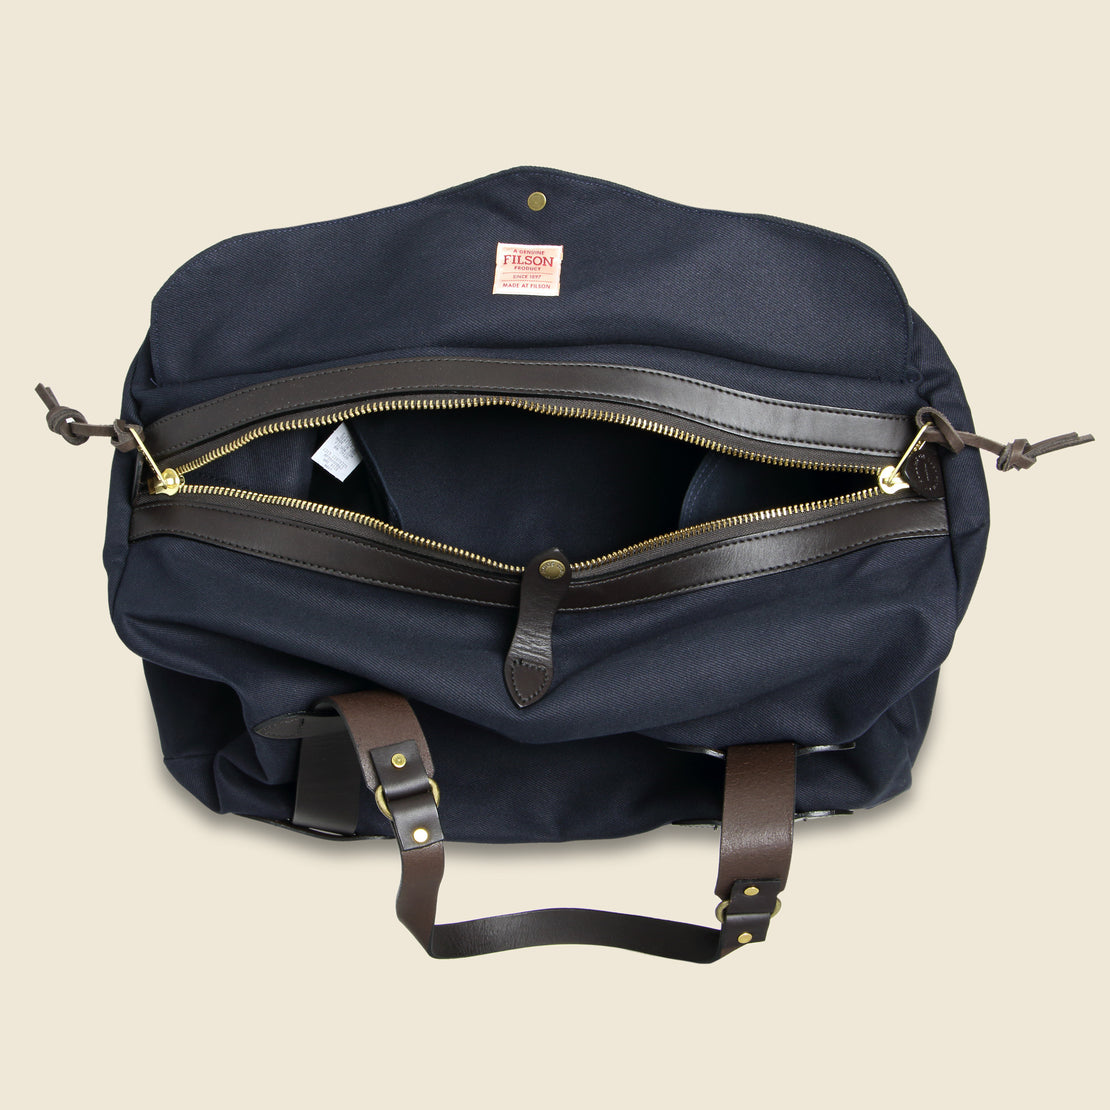 Medium Carry-On Duffle Bag - Navy - Filson - STAG Provisions - Accessories - Bags / Luggage